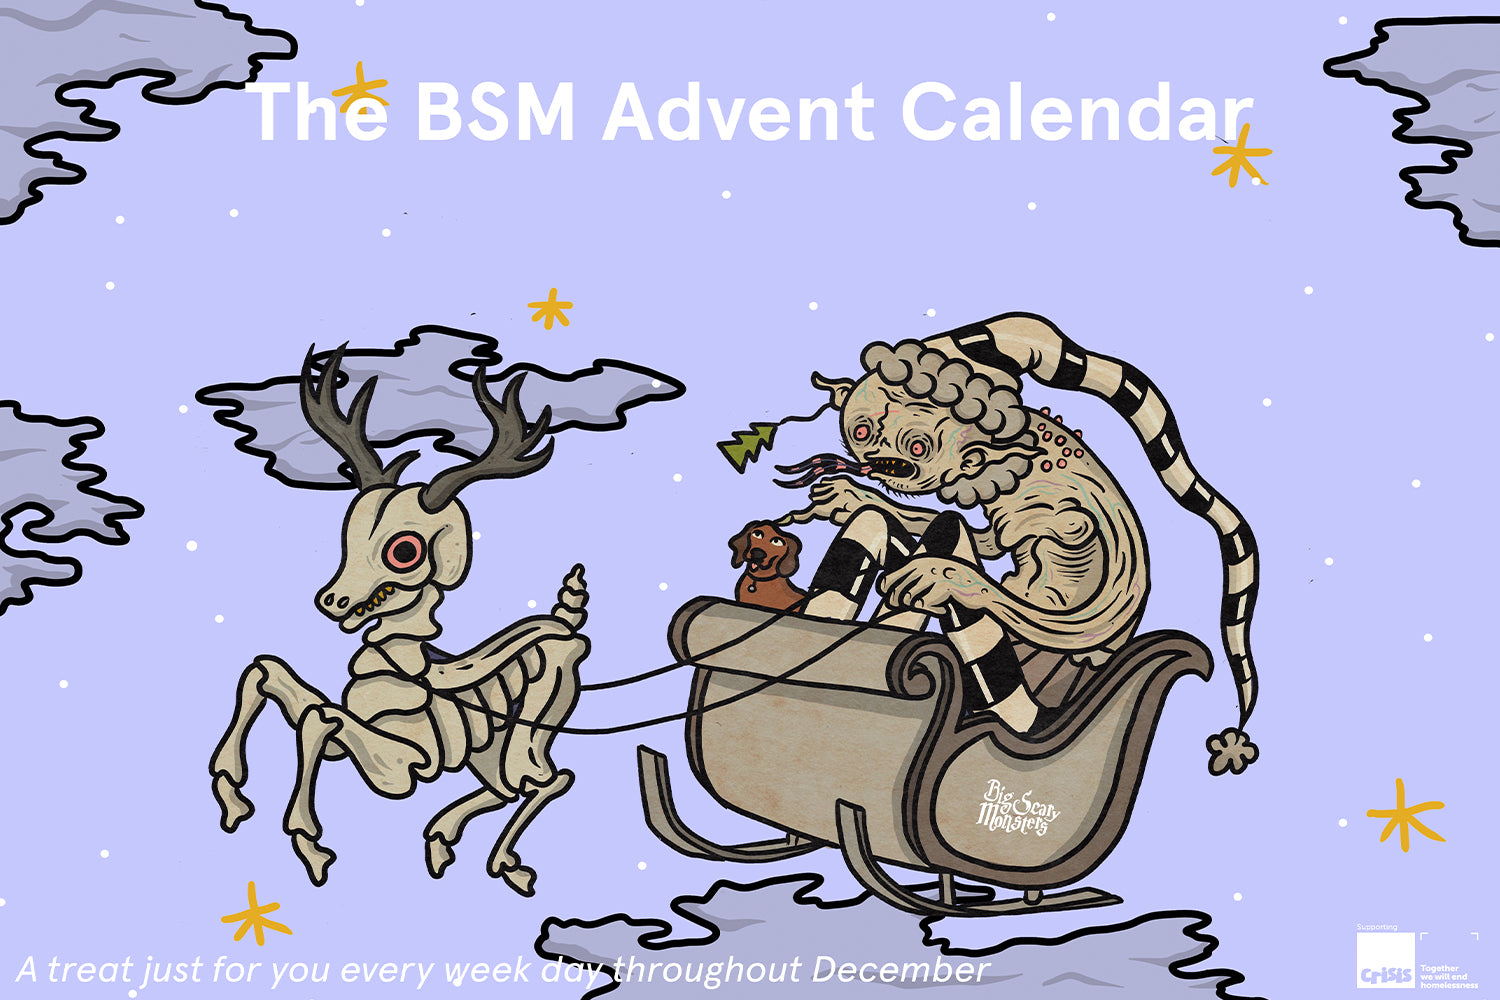 Welcome to The BSM Advent Calendar!